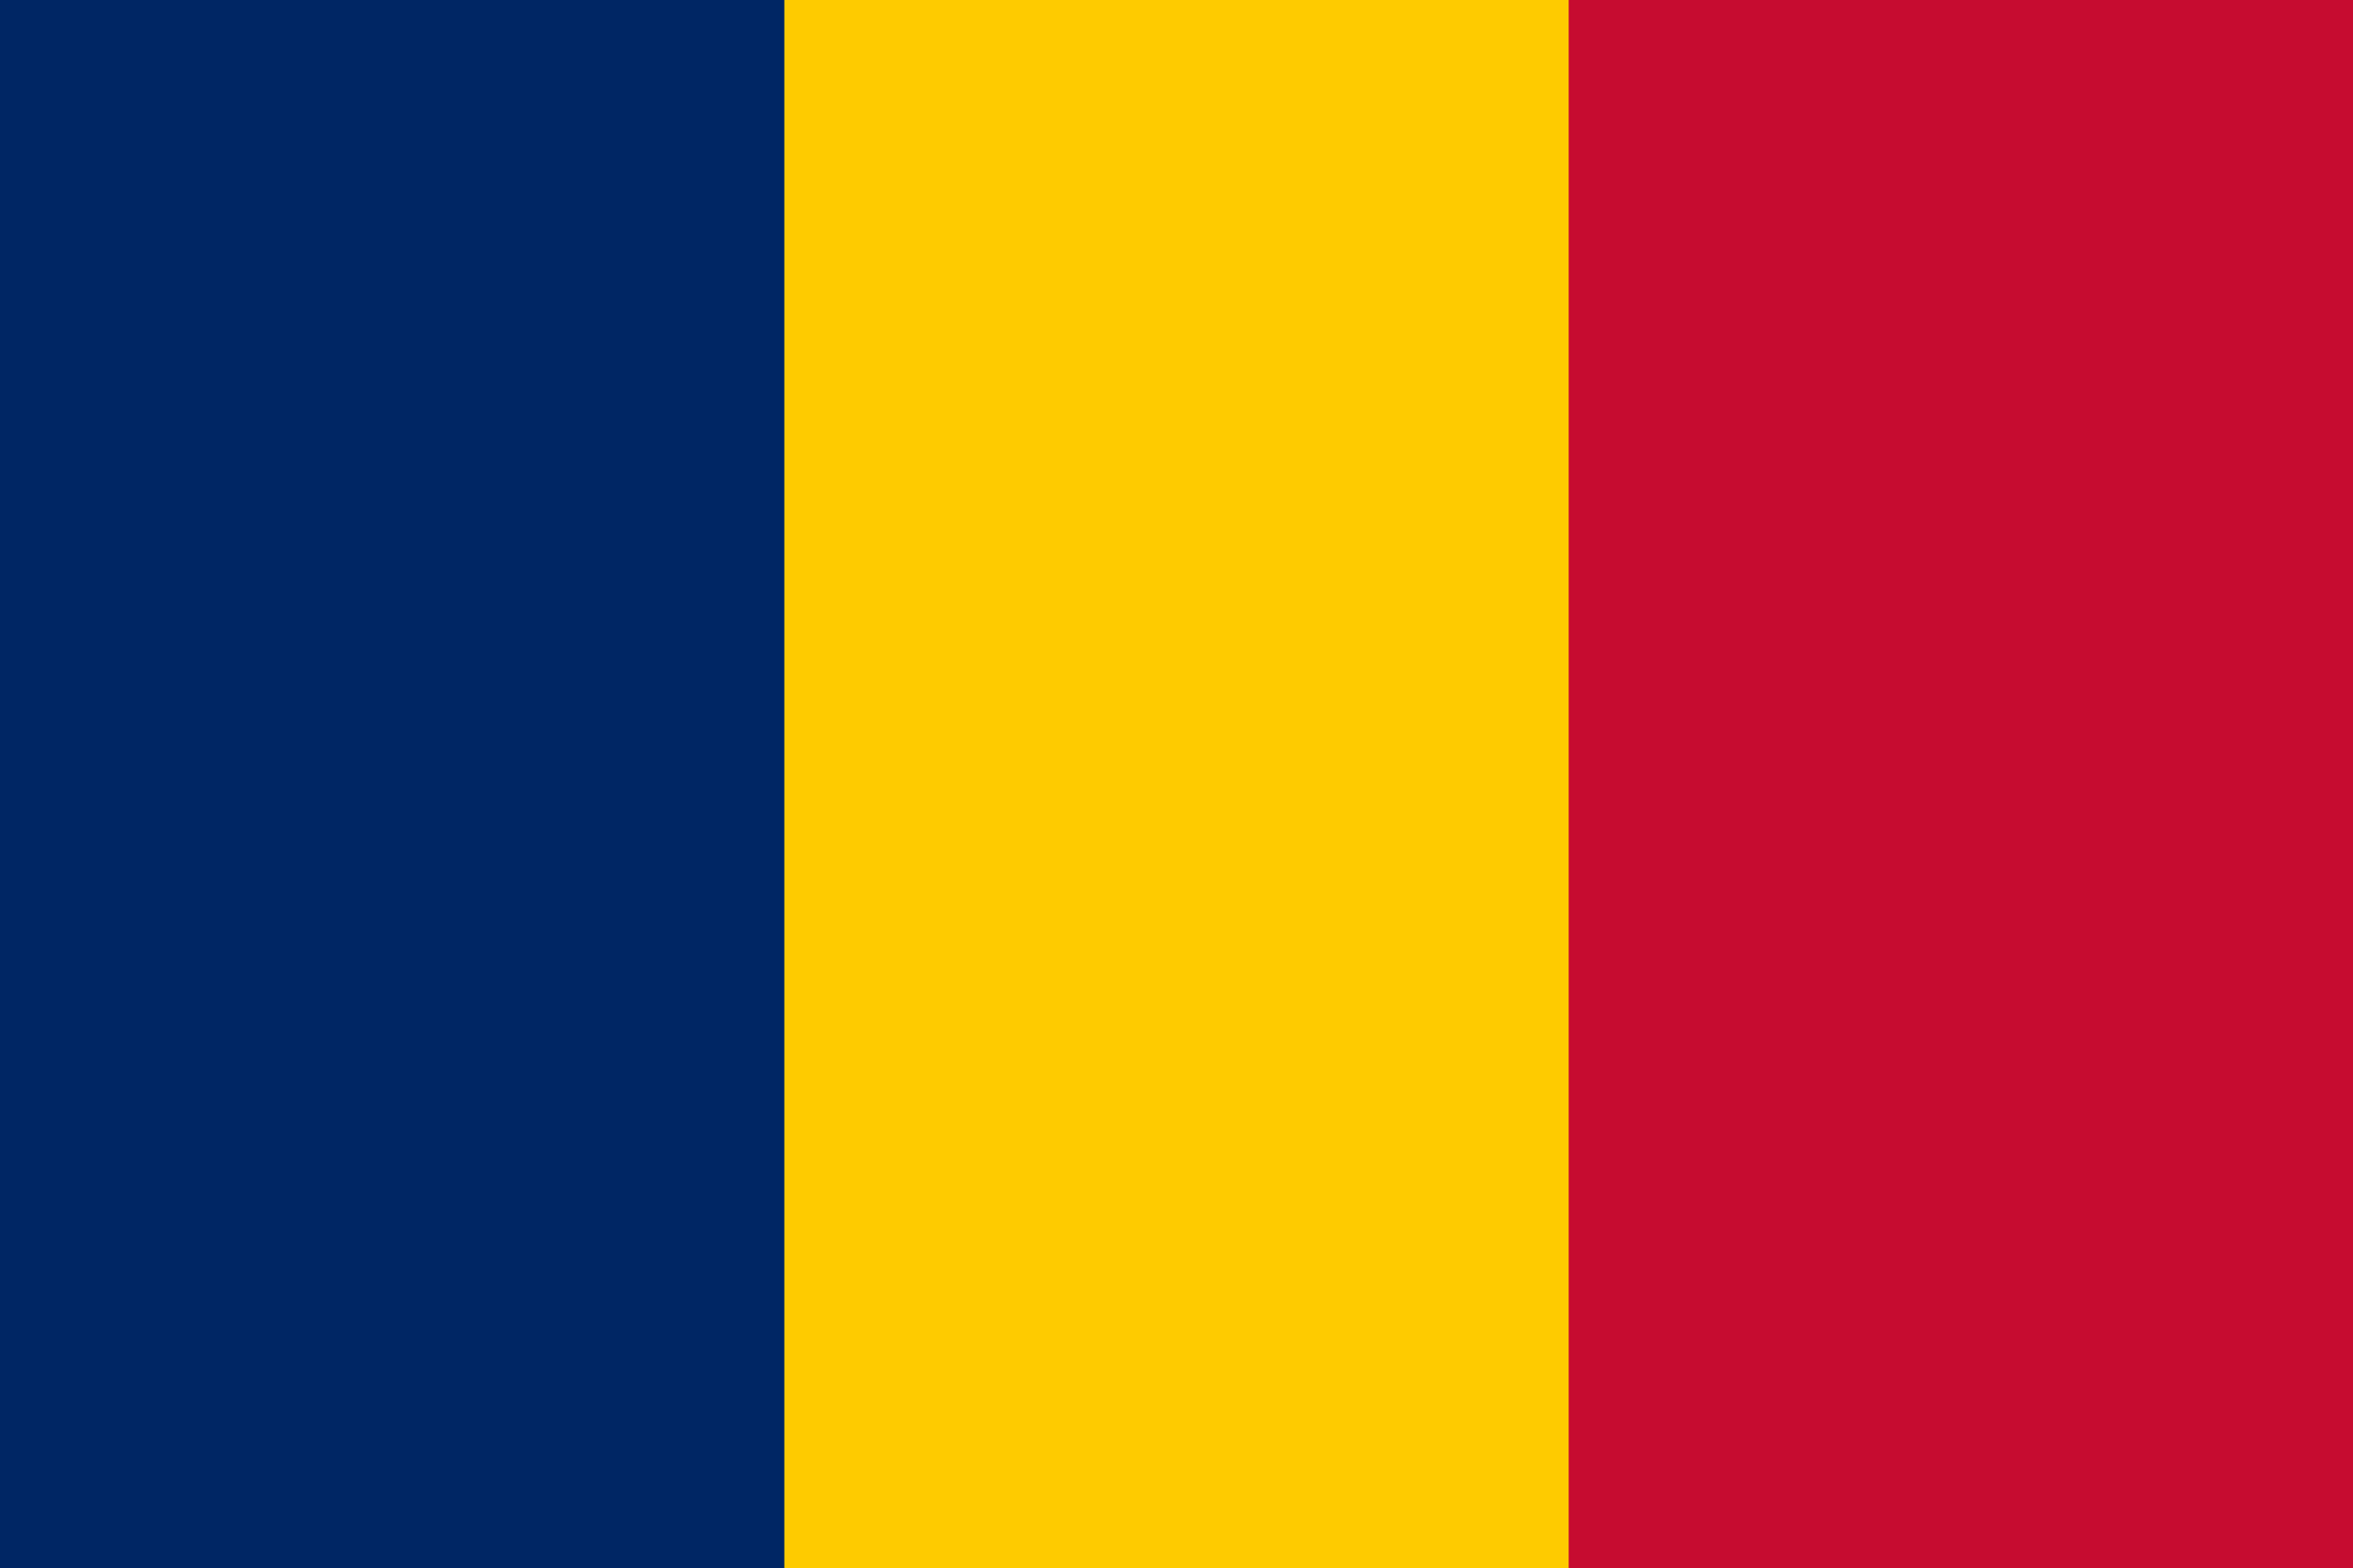 Chad Flag Image - Free Download